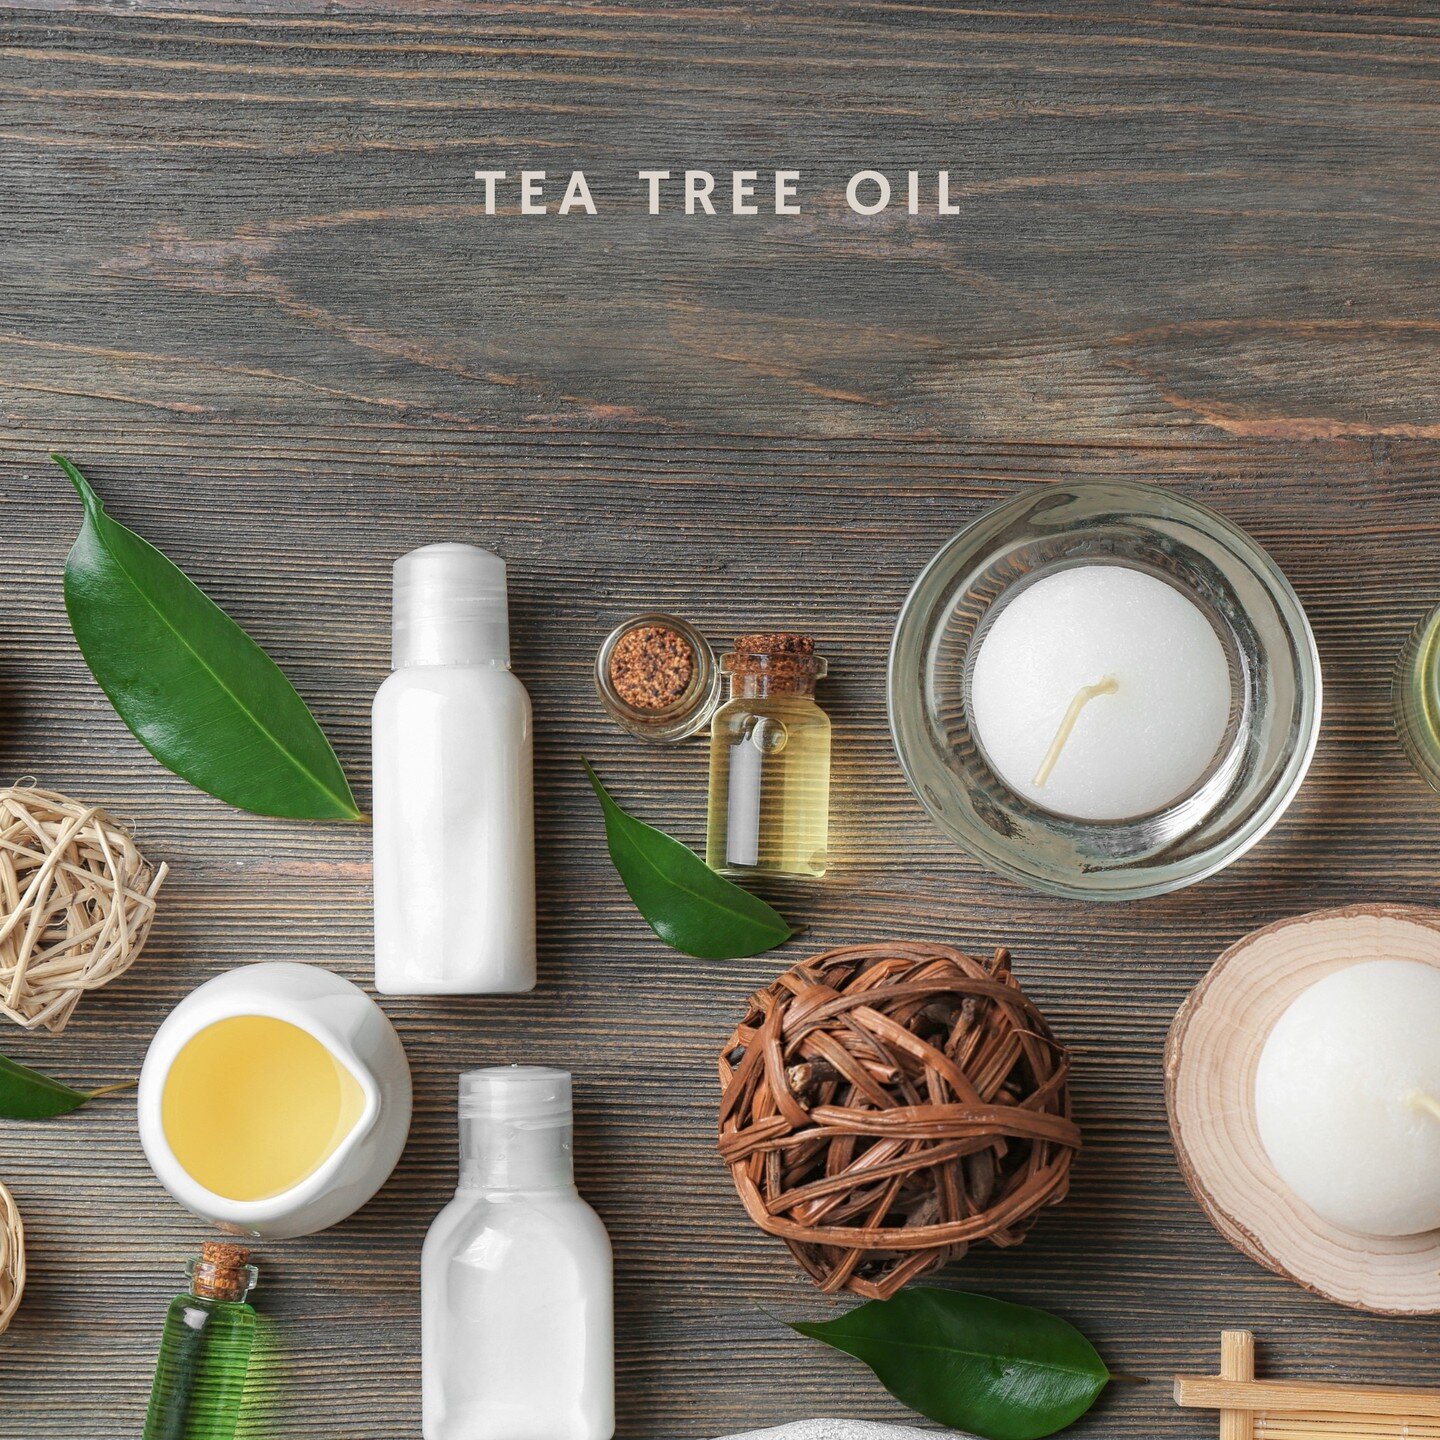 Tea tree oil comes from the leaves of Melaleuca alternifolia, a small tree native to Queensland and New South Wales, Australia. Although Melaleuca alternifolia is known as the tea tree, it should not be confused with the plant whose leaves are used t